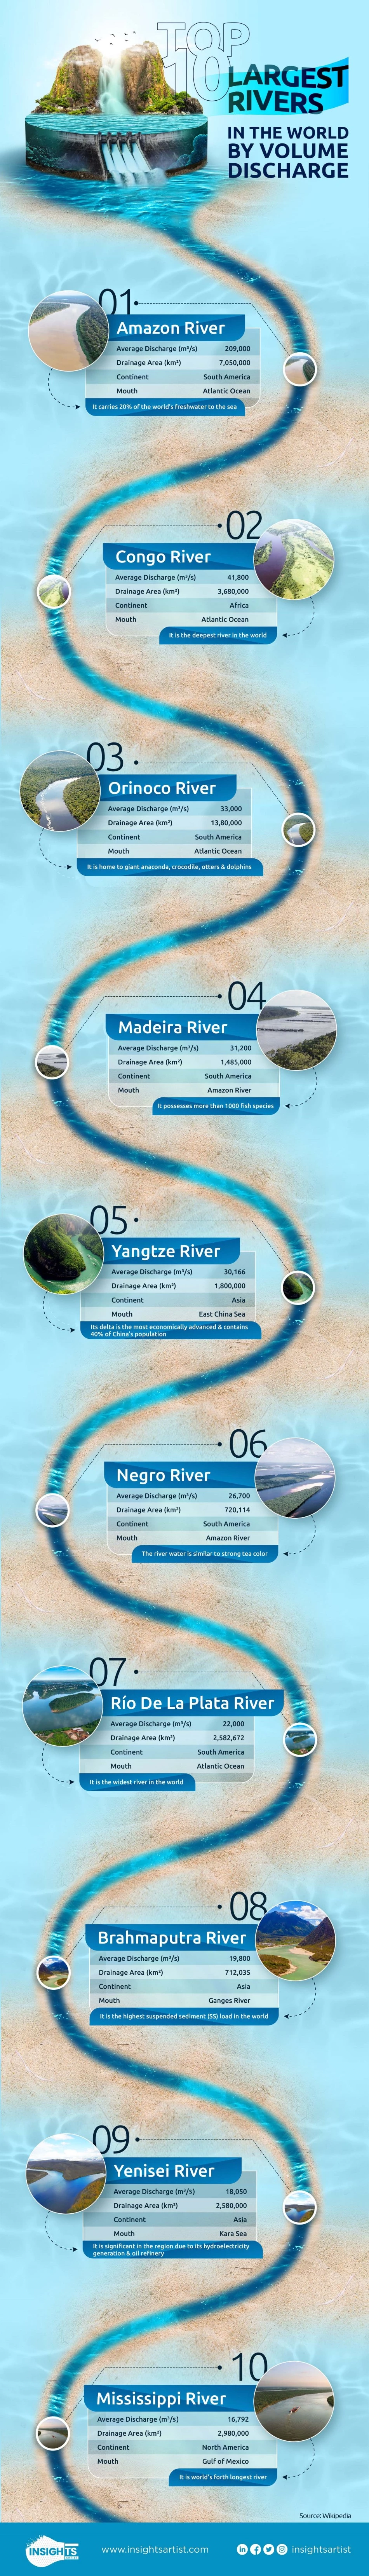 largest rivers in the world by volume